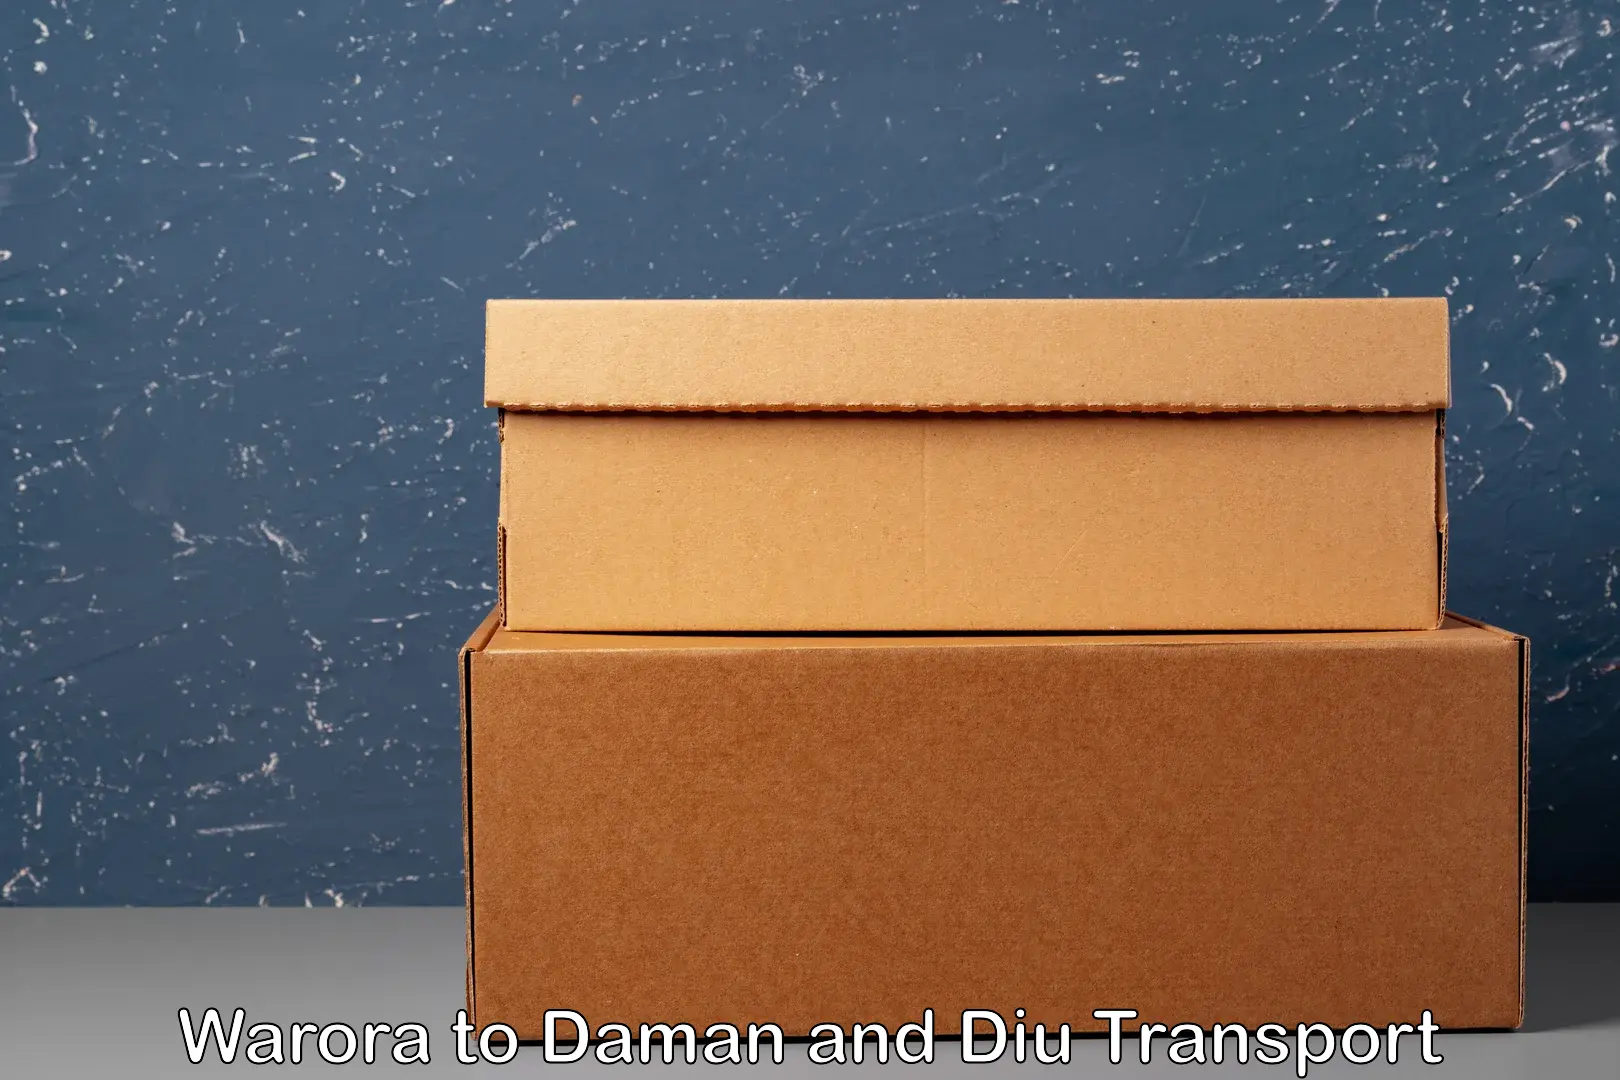 Part load transport service in India Warora to Daman and Diu